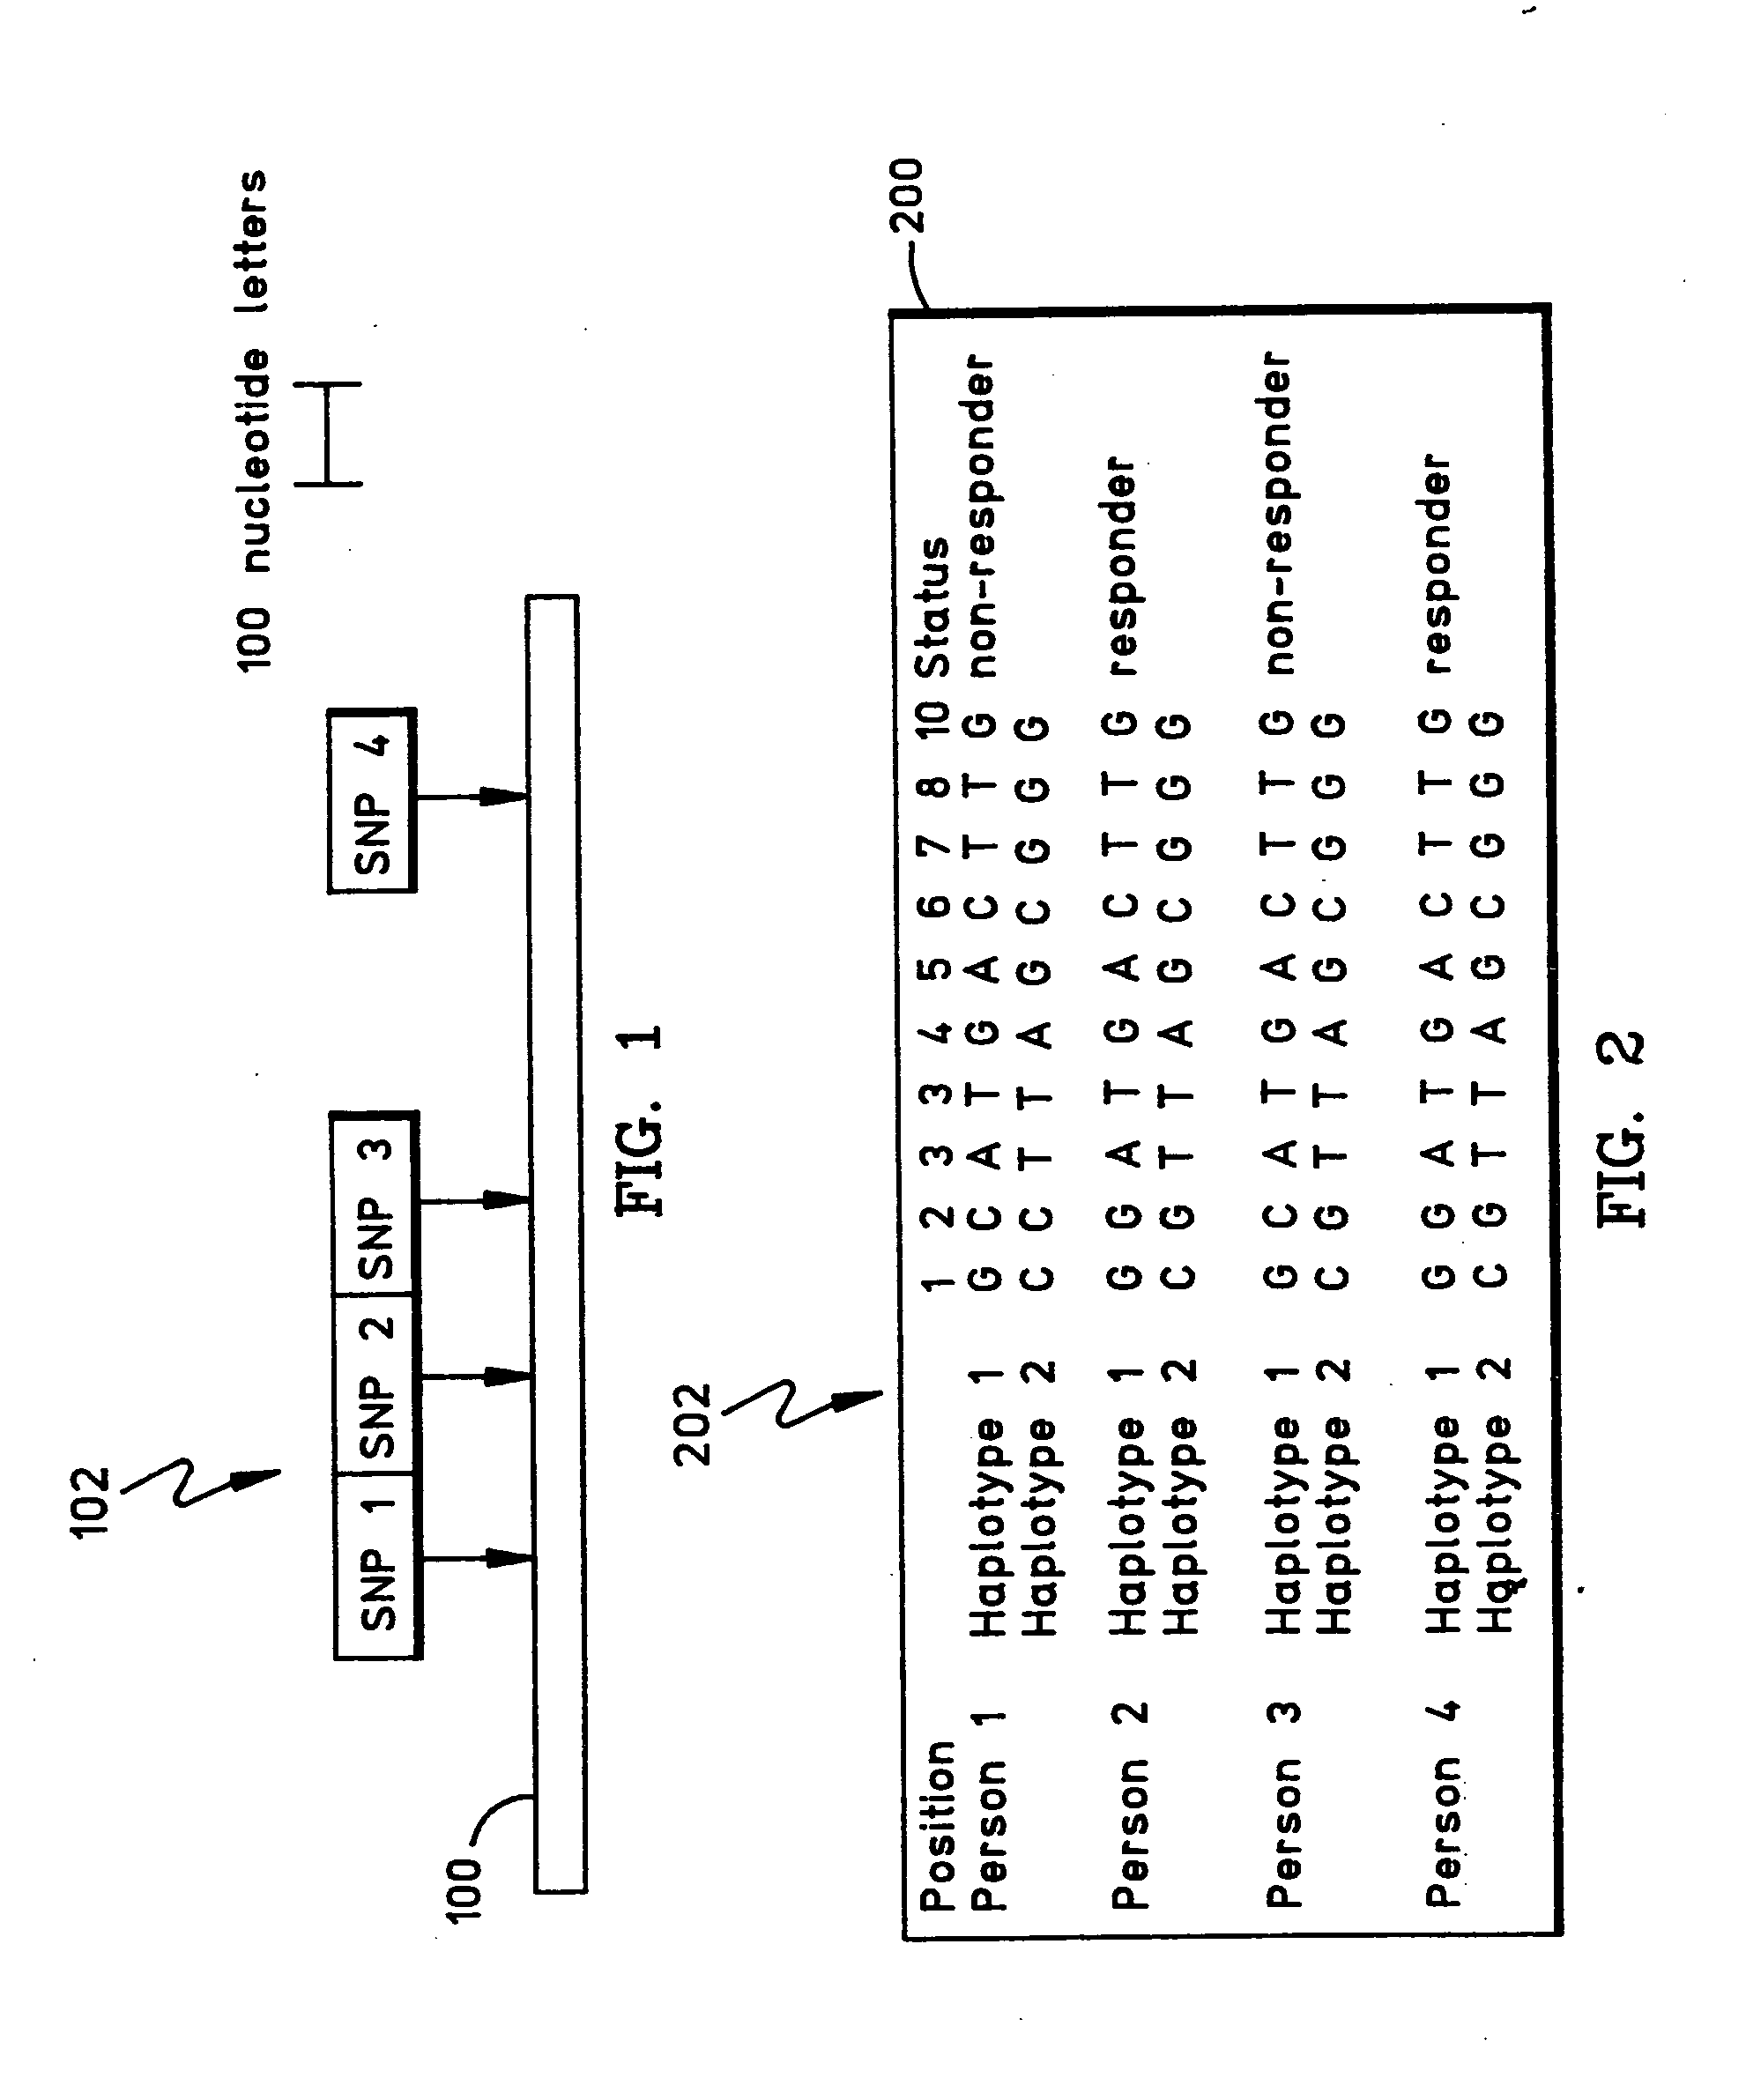 Methods and apparatus for complex gentics classification based on correspondence anlysis and linear/quadratic analysis